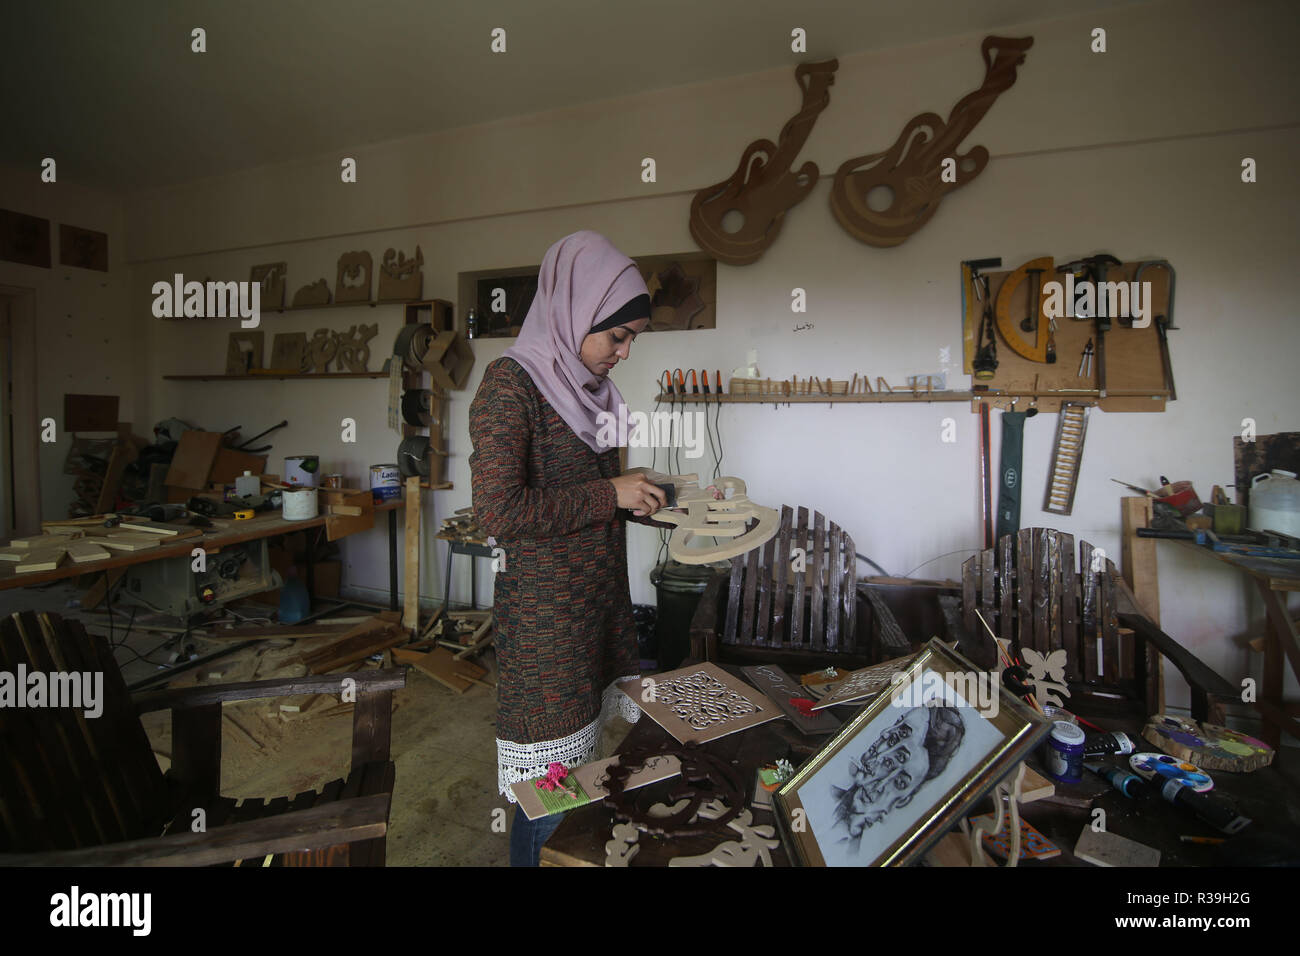 Gaza. 22nd Nov, 2018. Palestinian artist Walaa Abu al-Aish works at her workshop inside her house, in the southern Gaza Strip city of Rafah, on Nov. 22, 2018. The 22-year-old Walaa makes a living by creating art pieces out of wood and selling them through social media on Internet. Credit: Khaled Omar/Xinhua/Alamy Live News Stock Photo